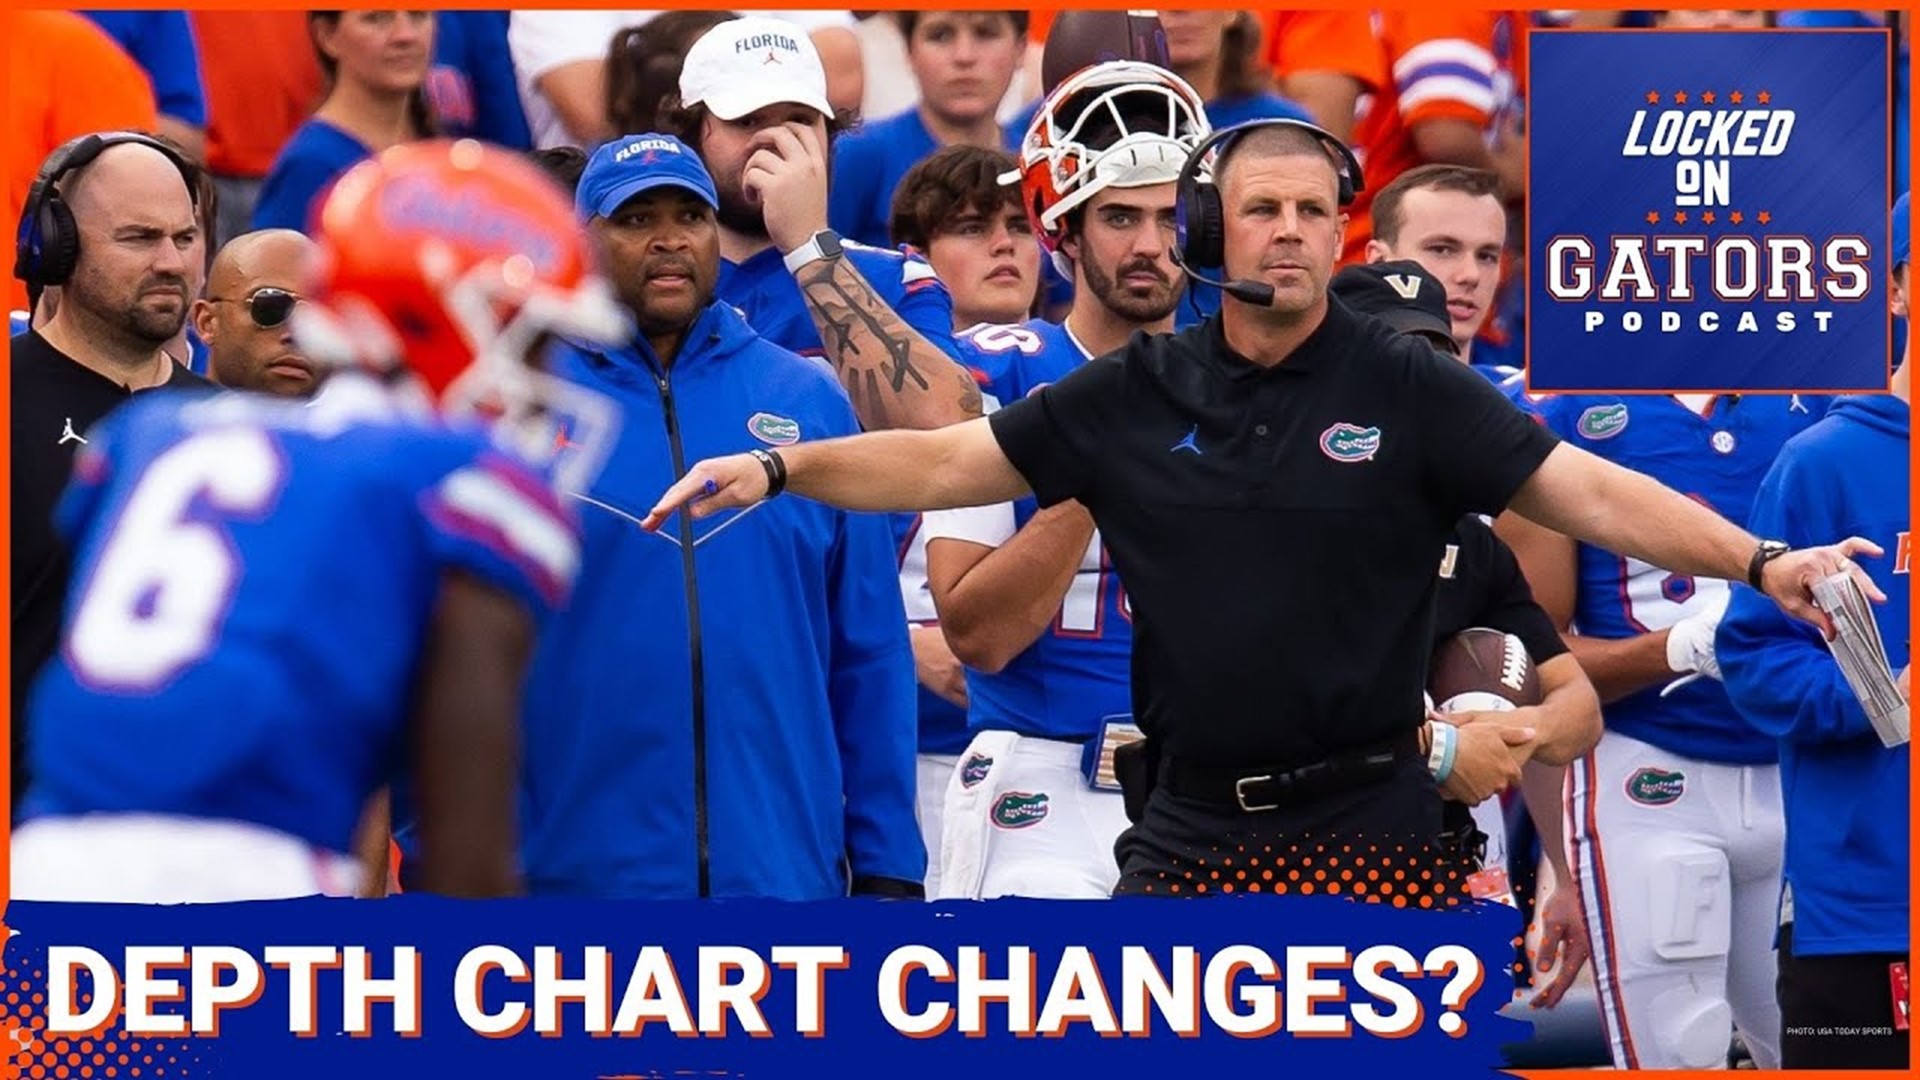 Florida Gators Depth Chart Changes Is It Andy Jean's Time to